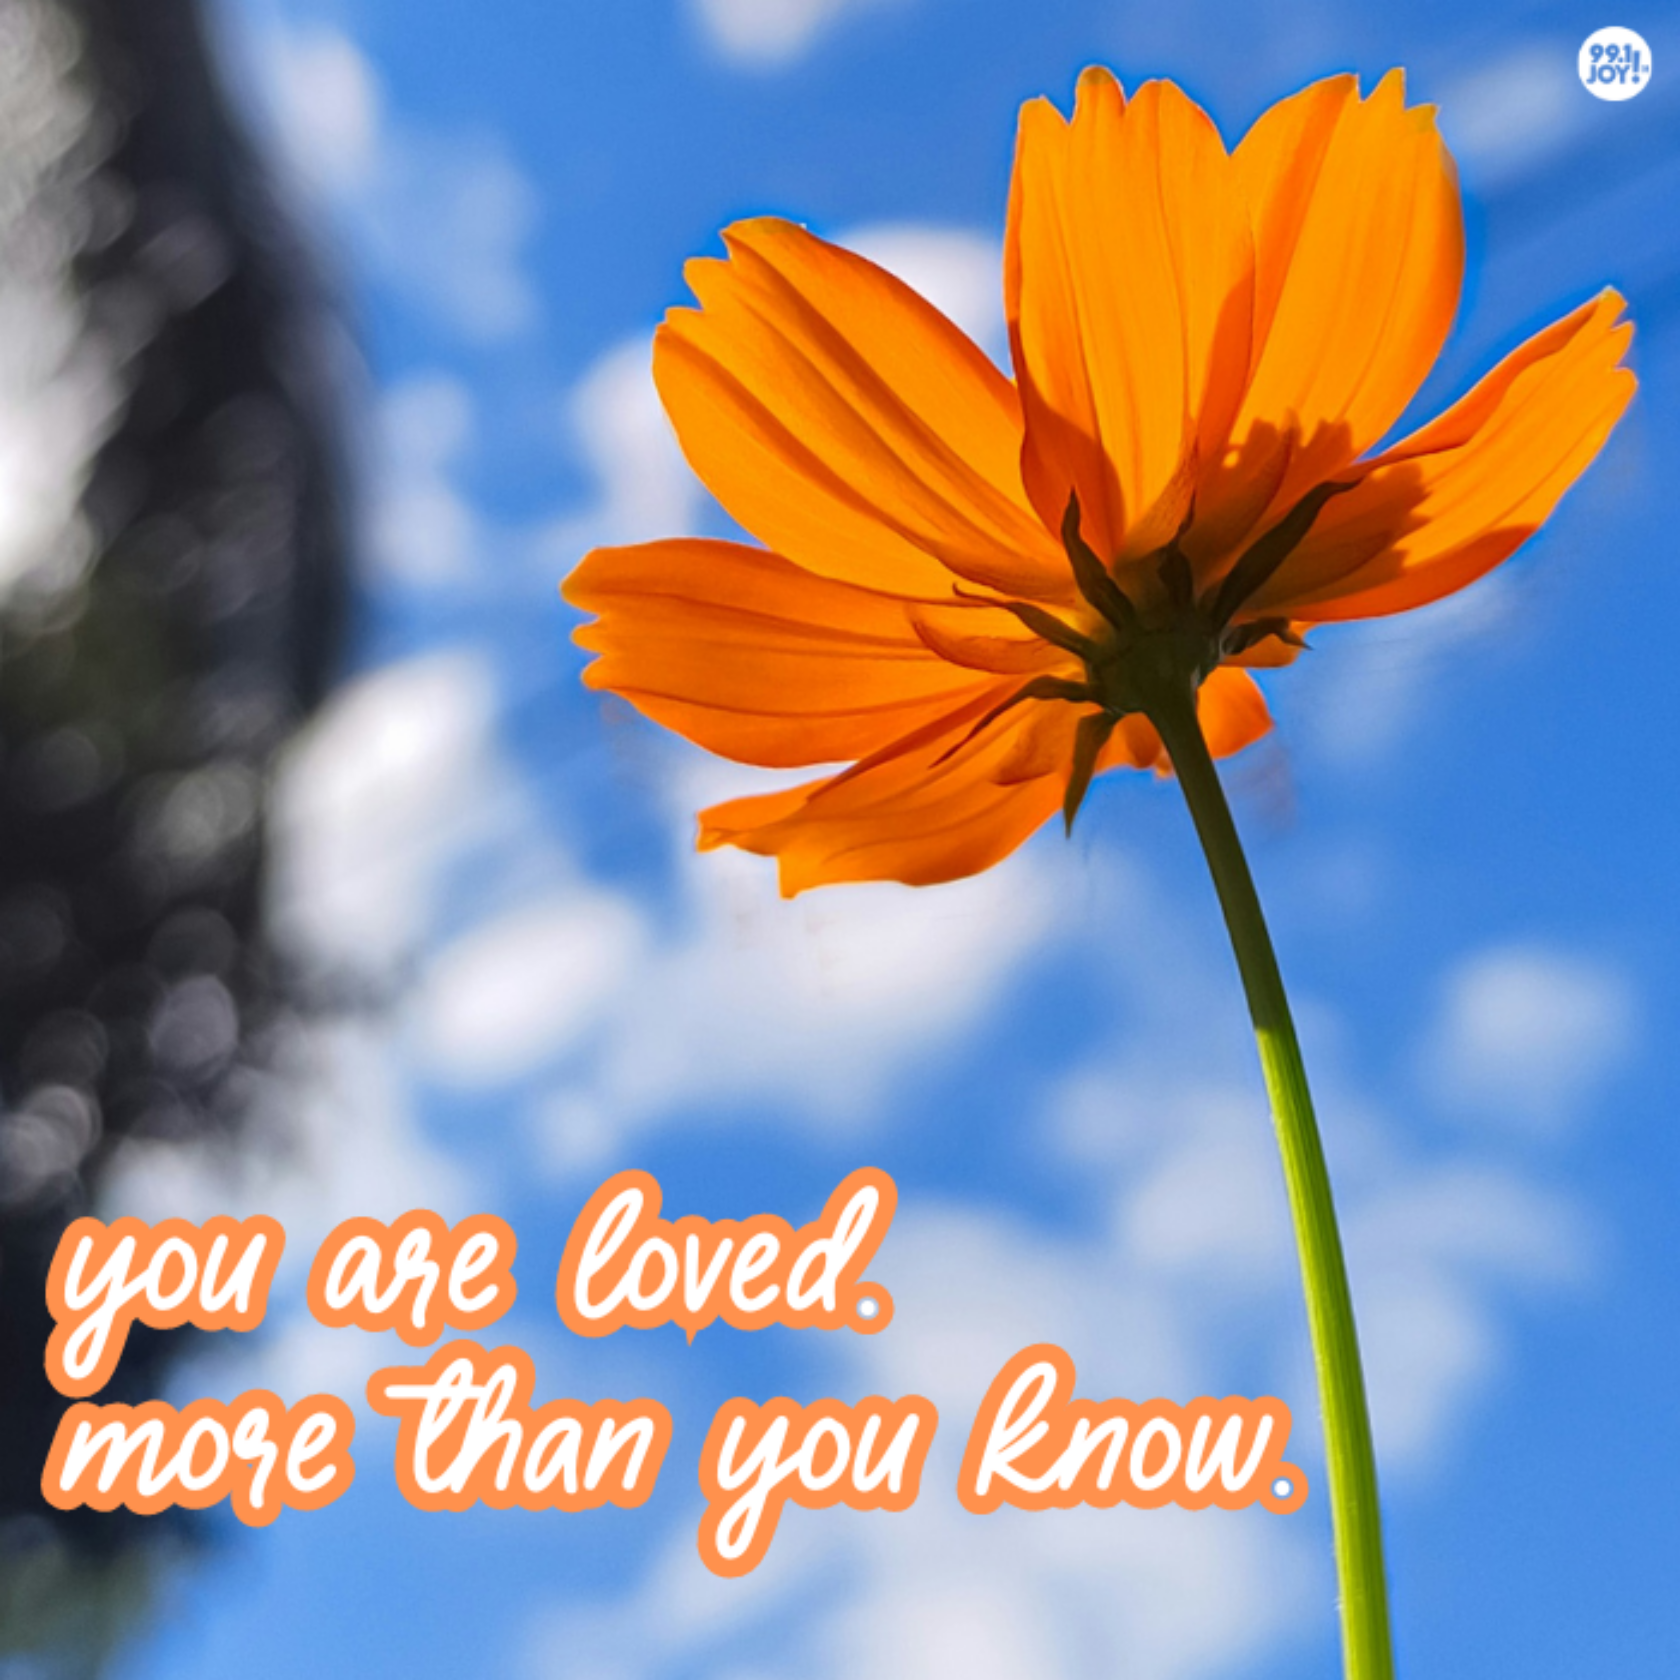 You Are Loved. More Than You Know.